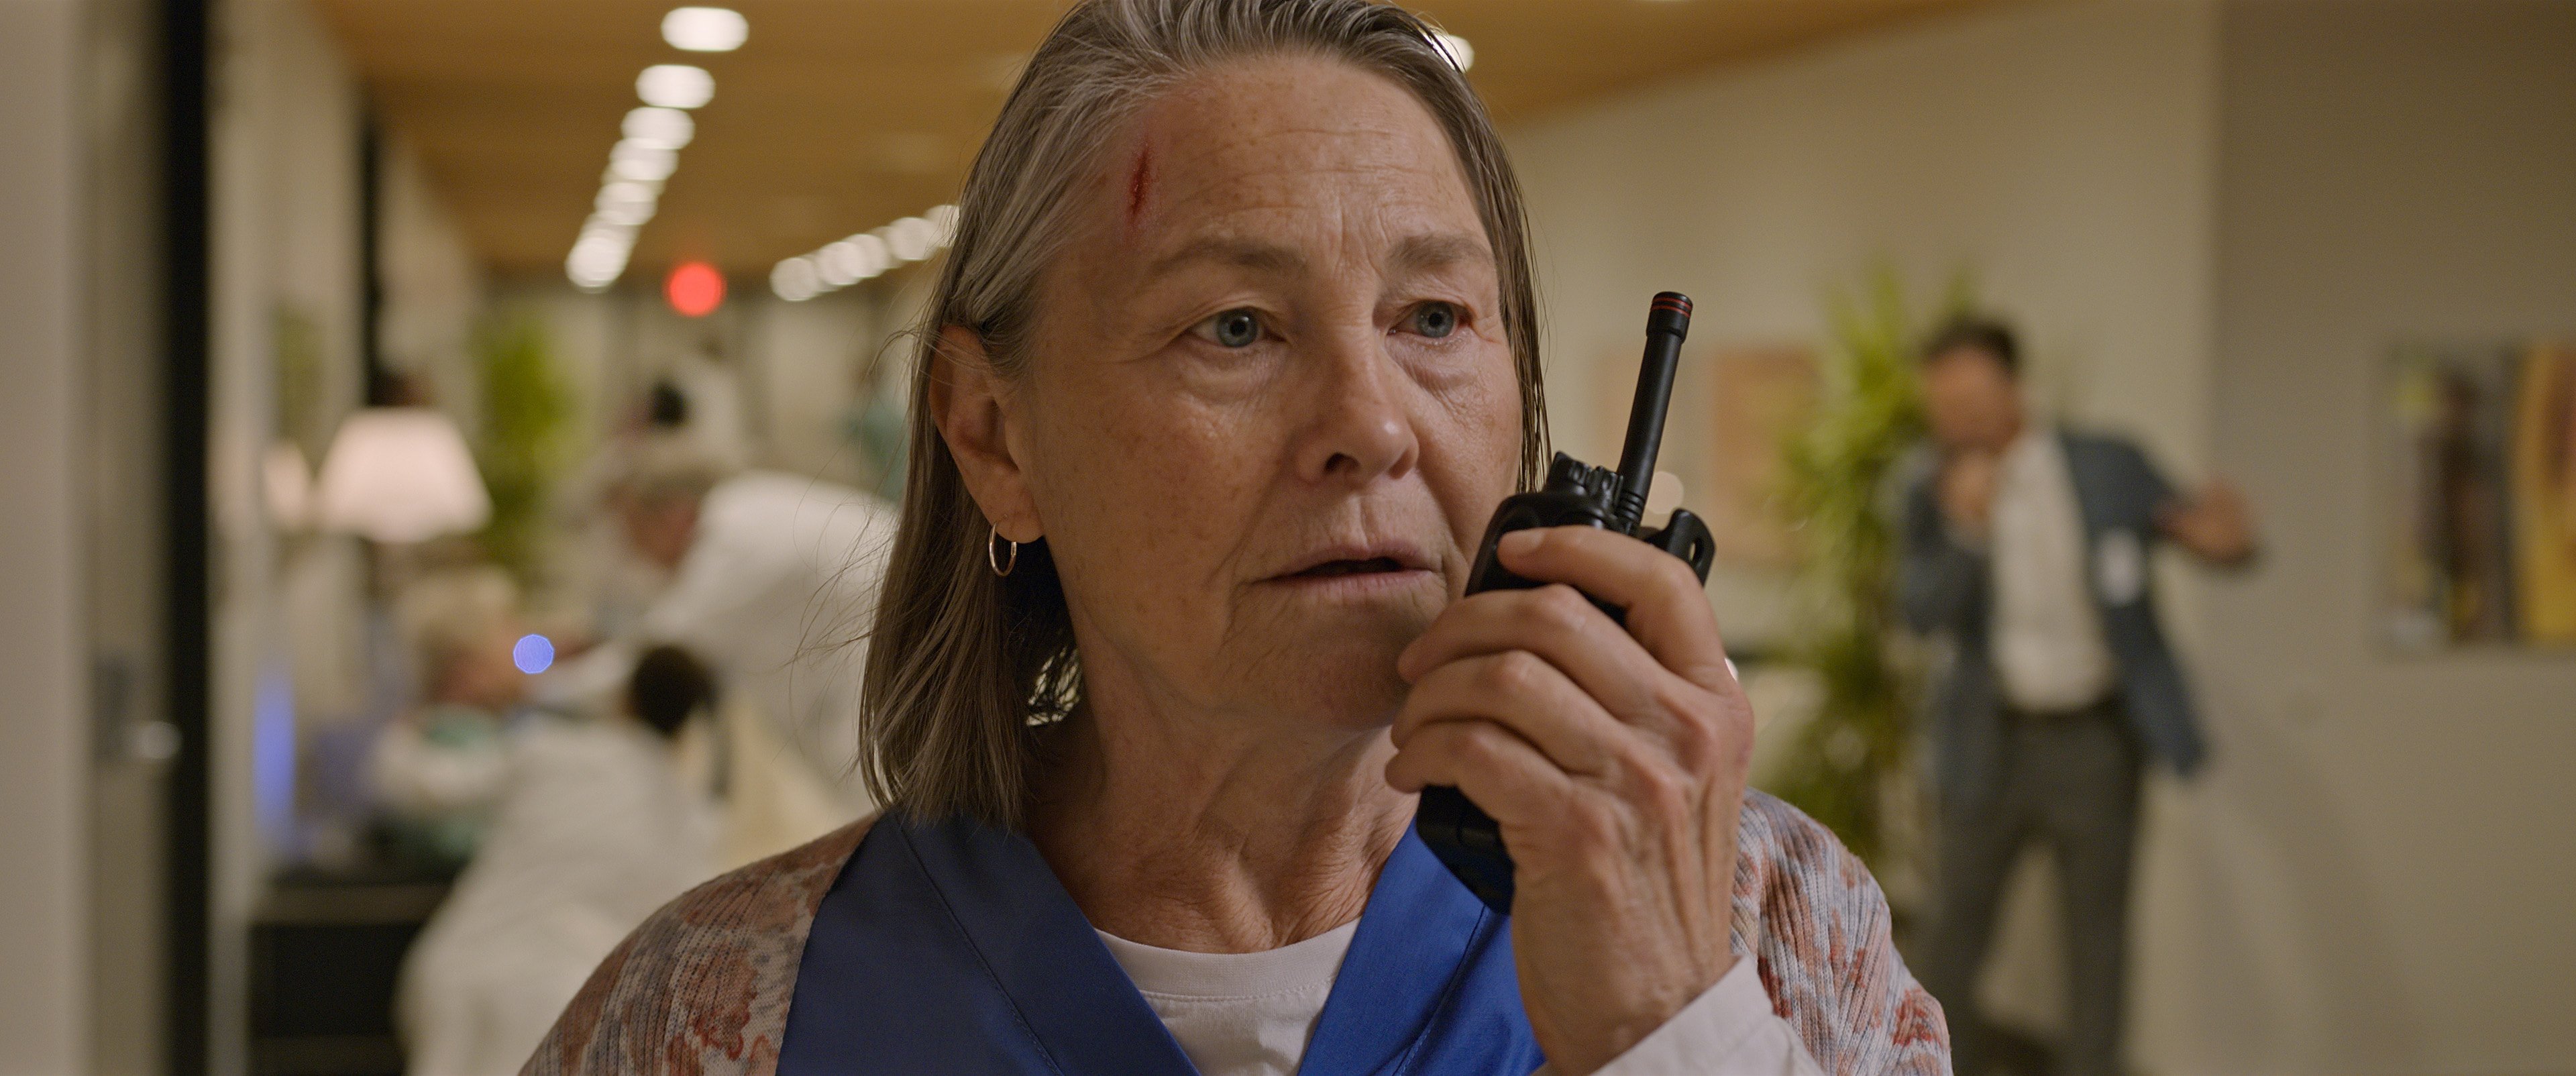 'Five Days At Memorial' cast member Cherry Jones speaks into a walkie talkie with a cut on her head